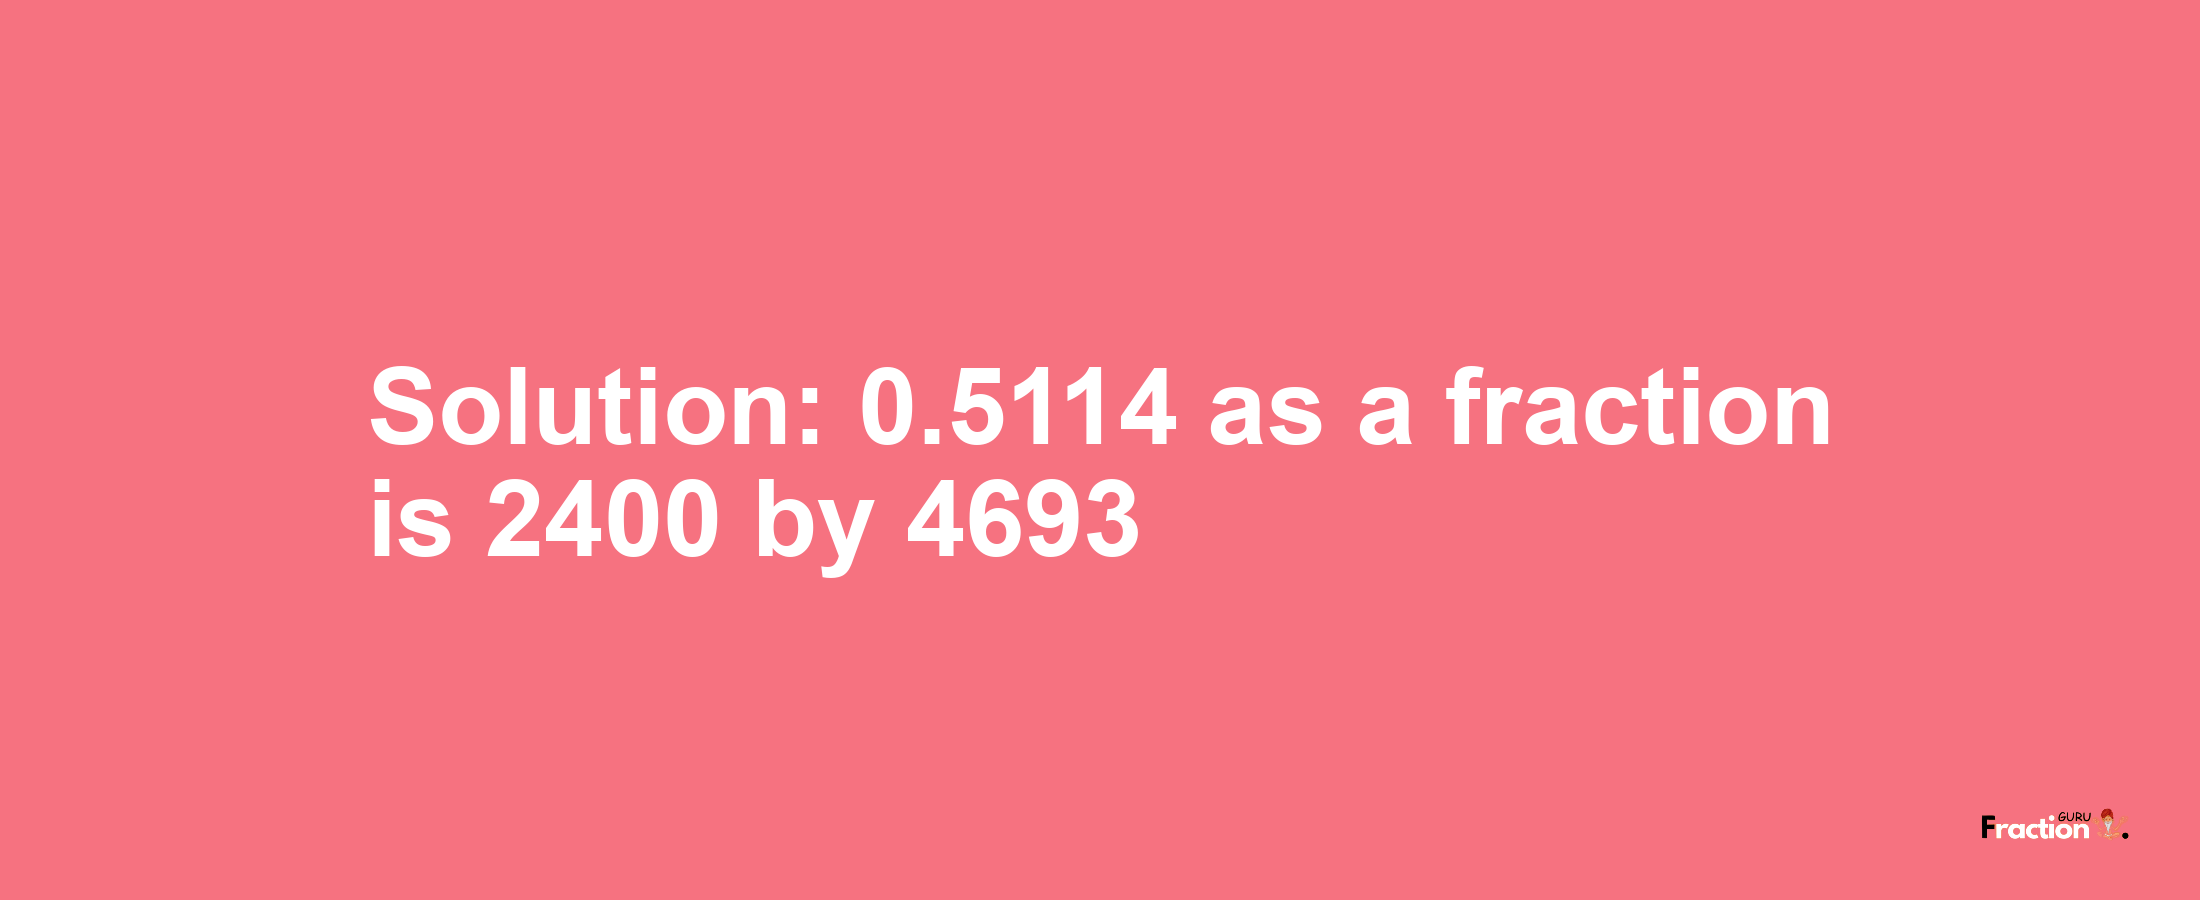 Solution:0.5114 as a fraction is 2400/4693